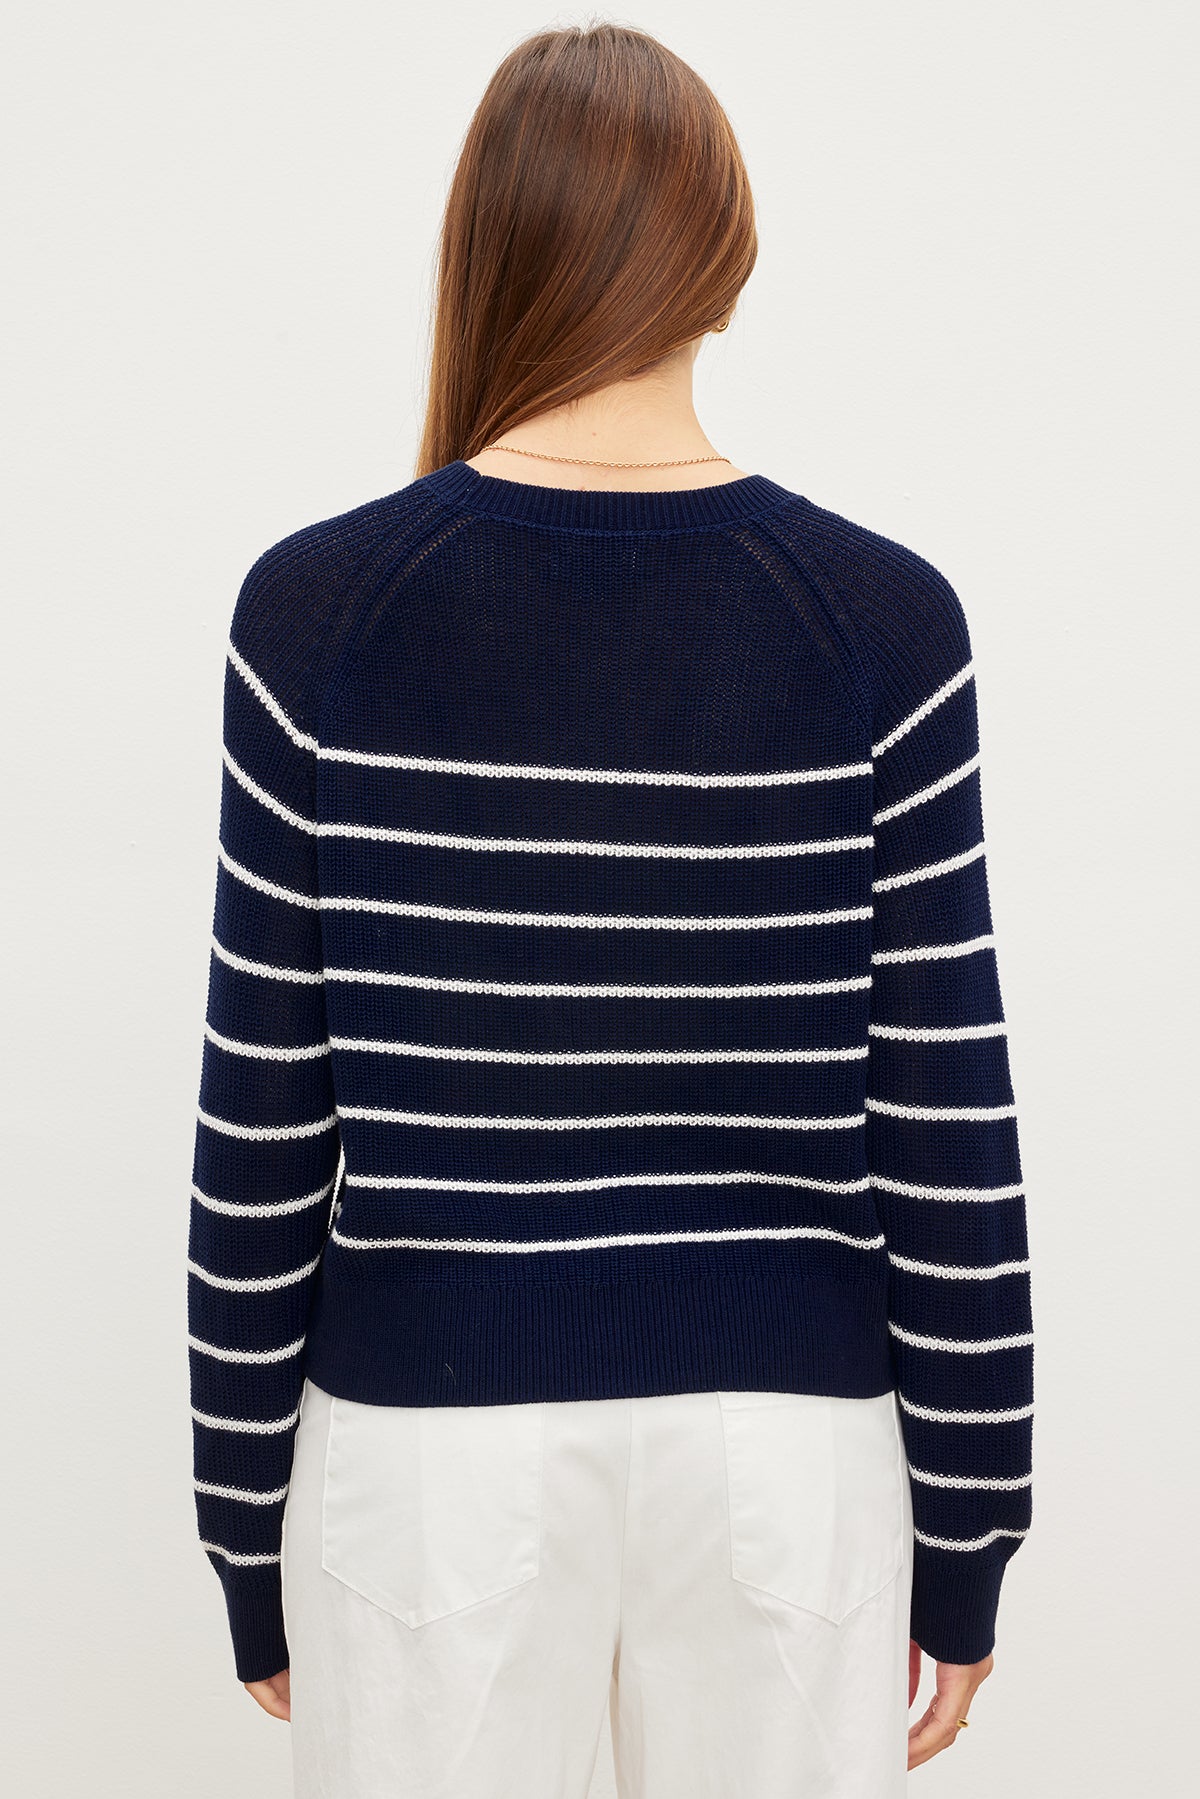 The back view of a woman wearing a Velvet by Graham & Spencer CHAYSE STRIPED CREW NECK SWEATER in textured cotton.-35955537248449